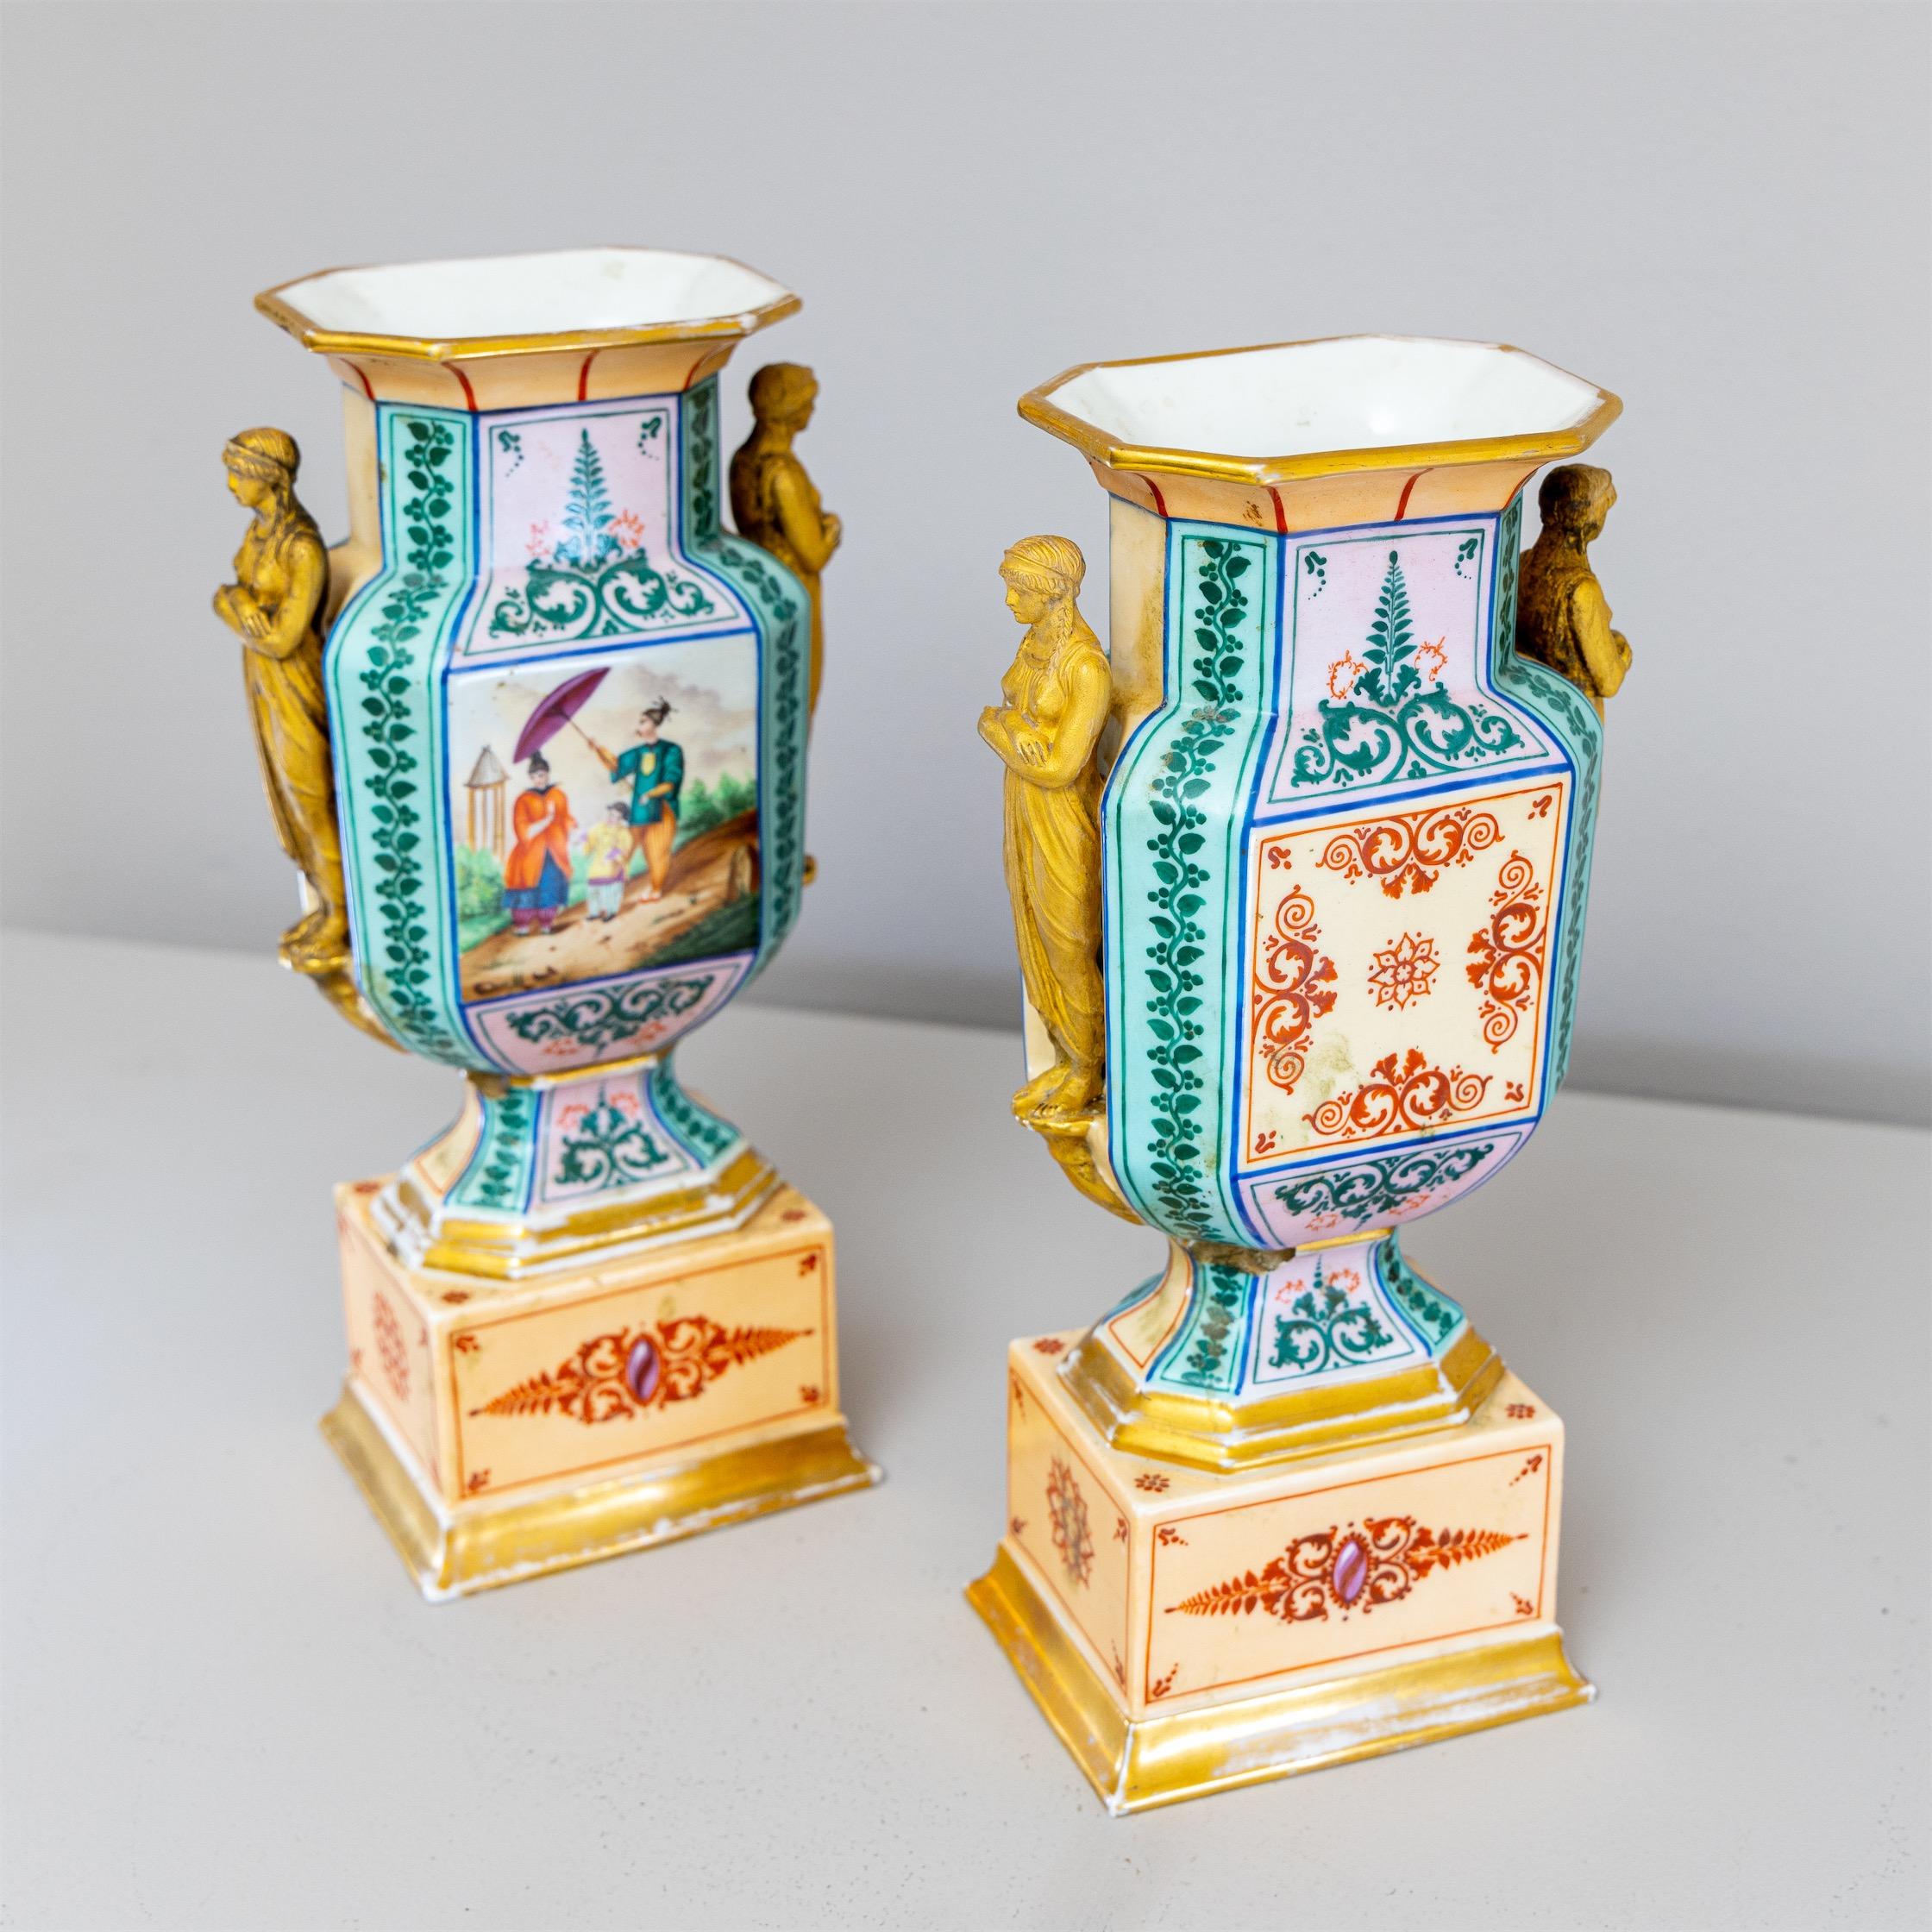 European Pair of Ceramic Amphoras with figurative Scenes, Blue and Gold, around 1830 For Sale